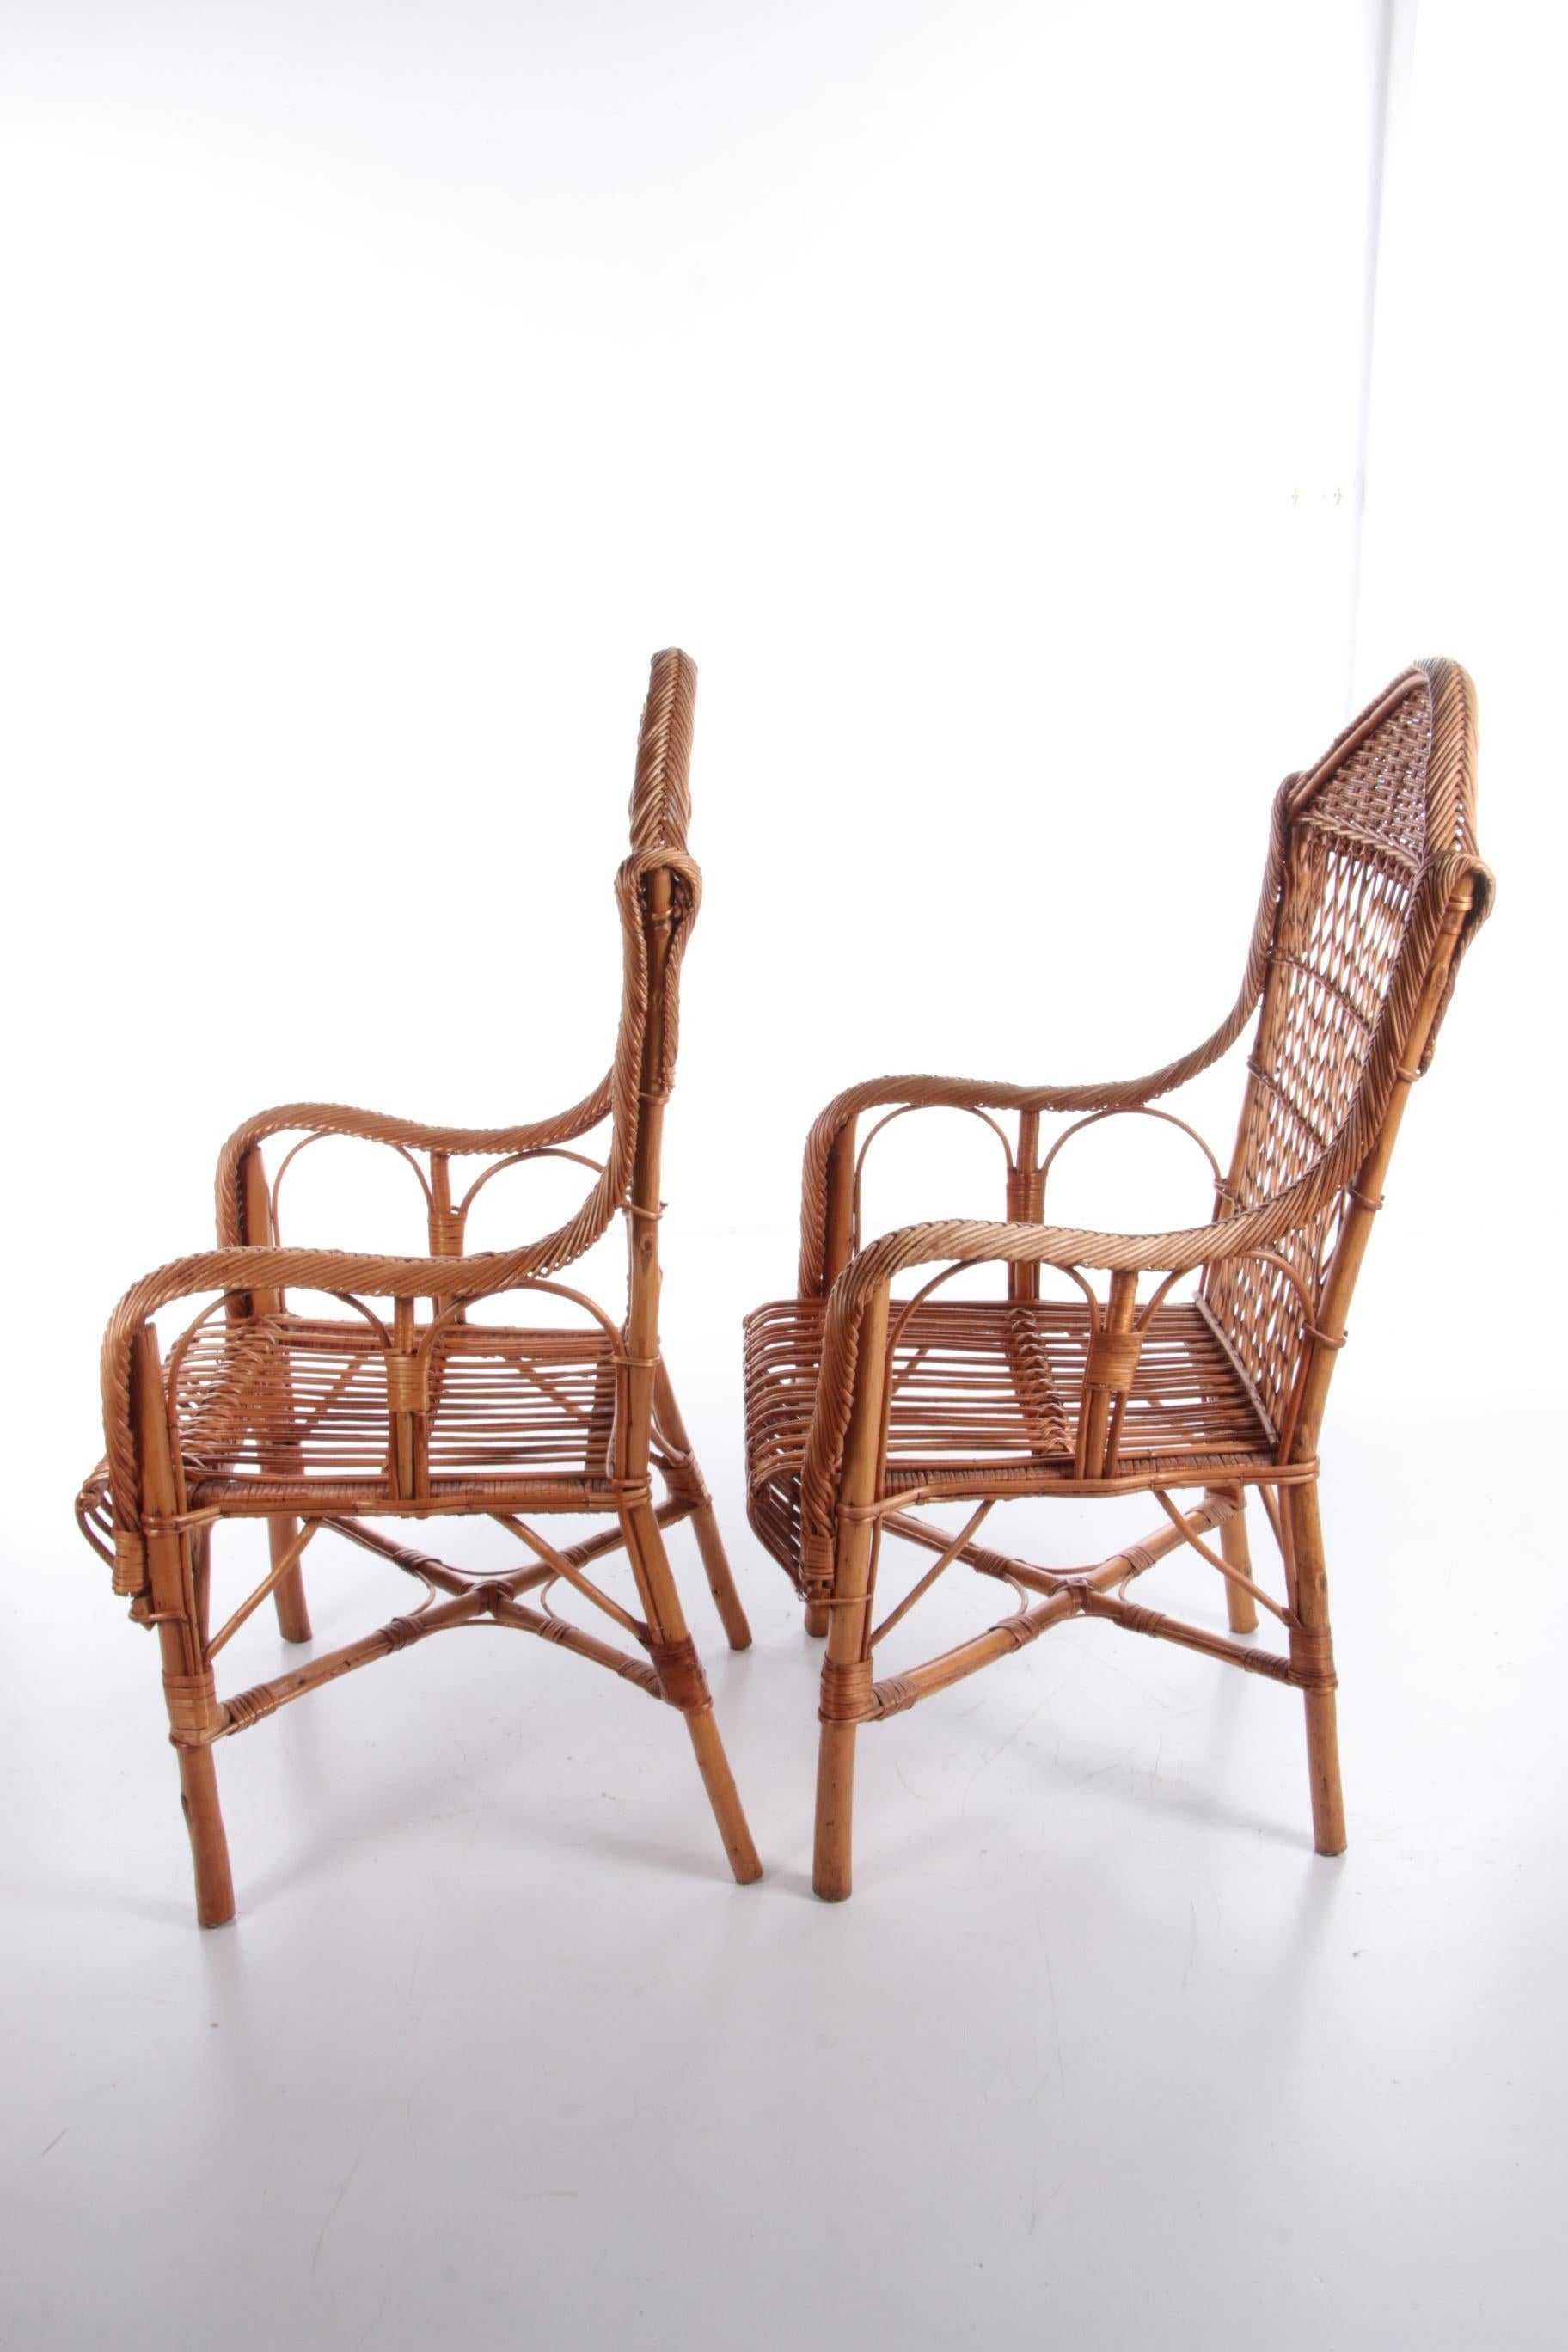 what are wicker chairs made of